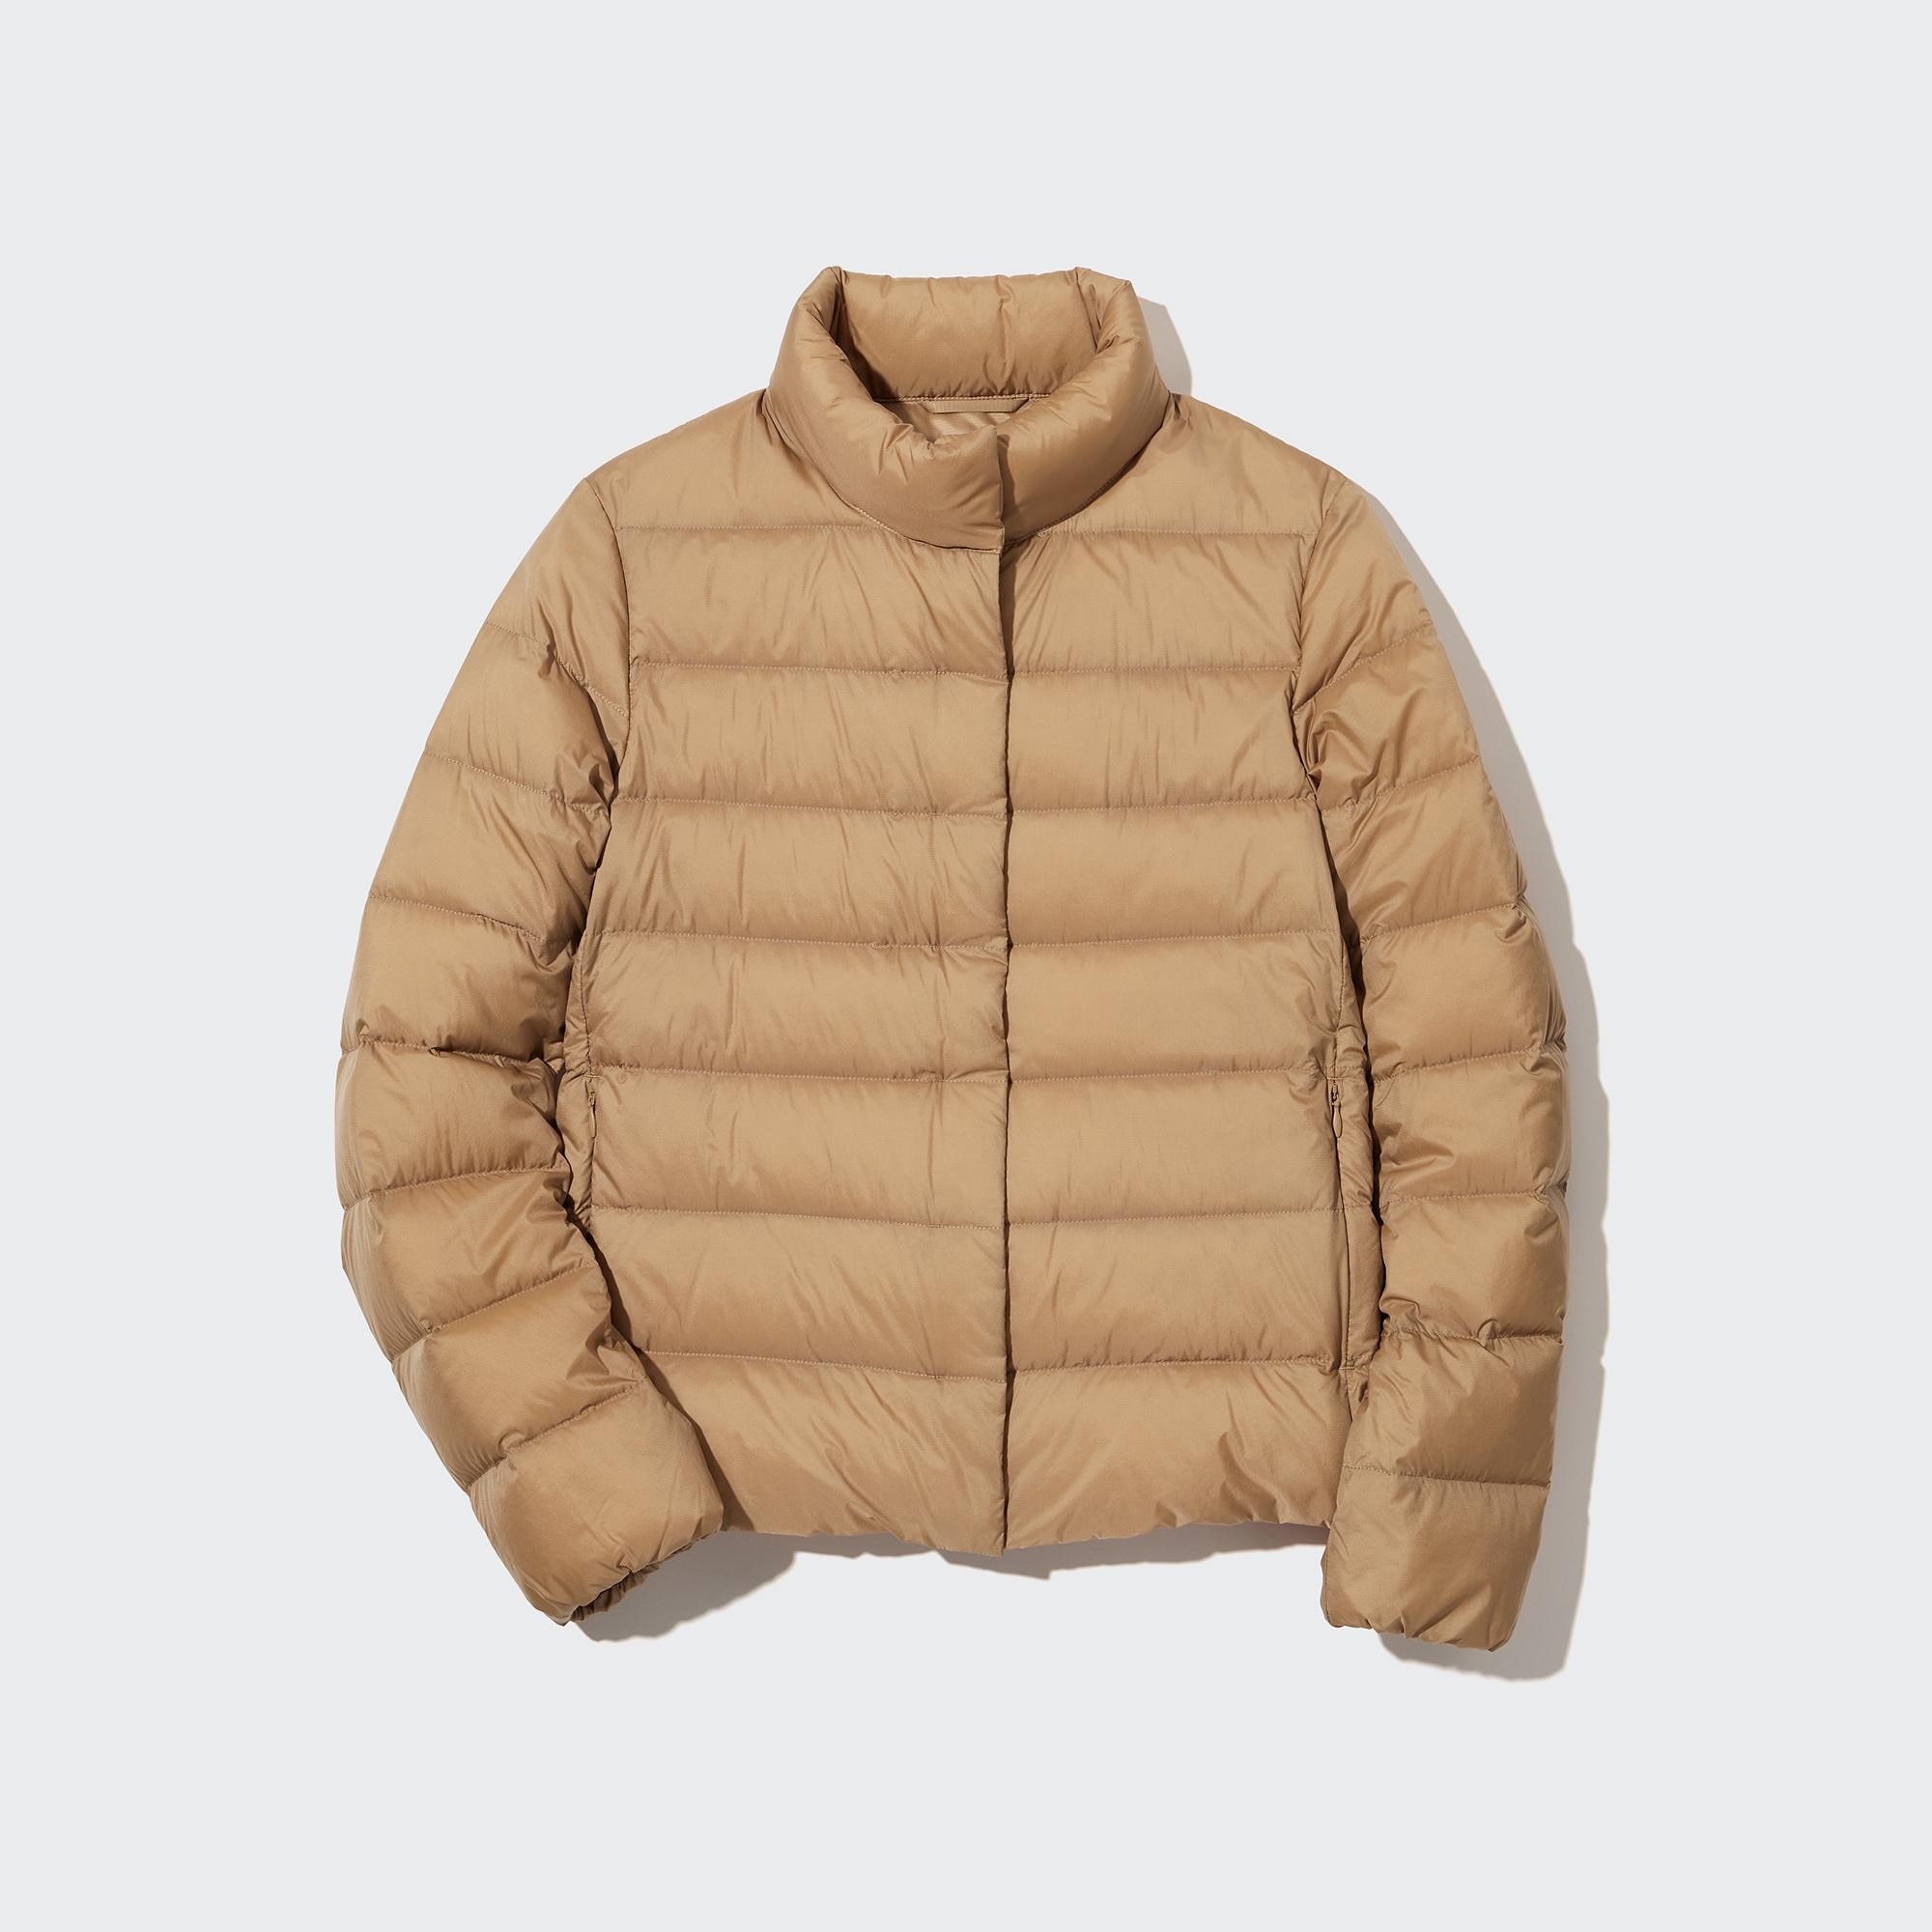 Review: Uniqlo Ultra Light Down Jacket